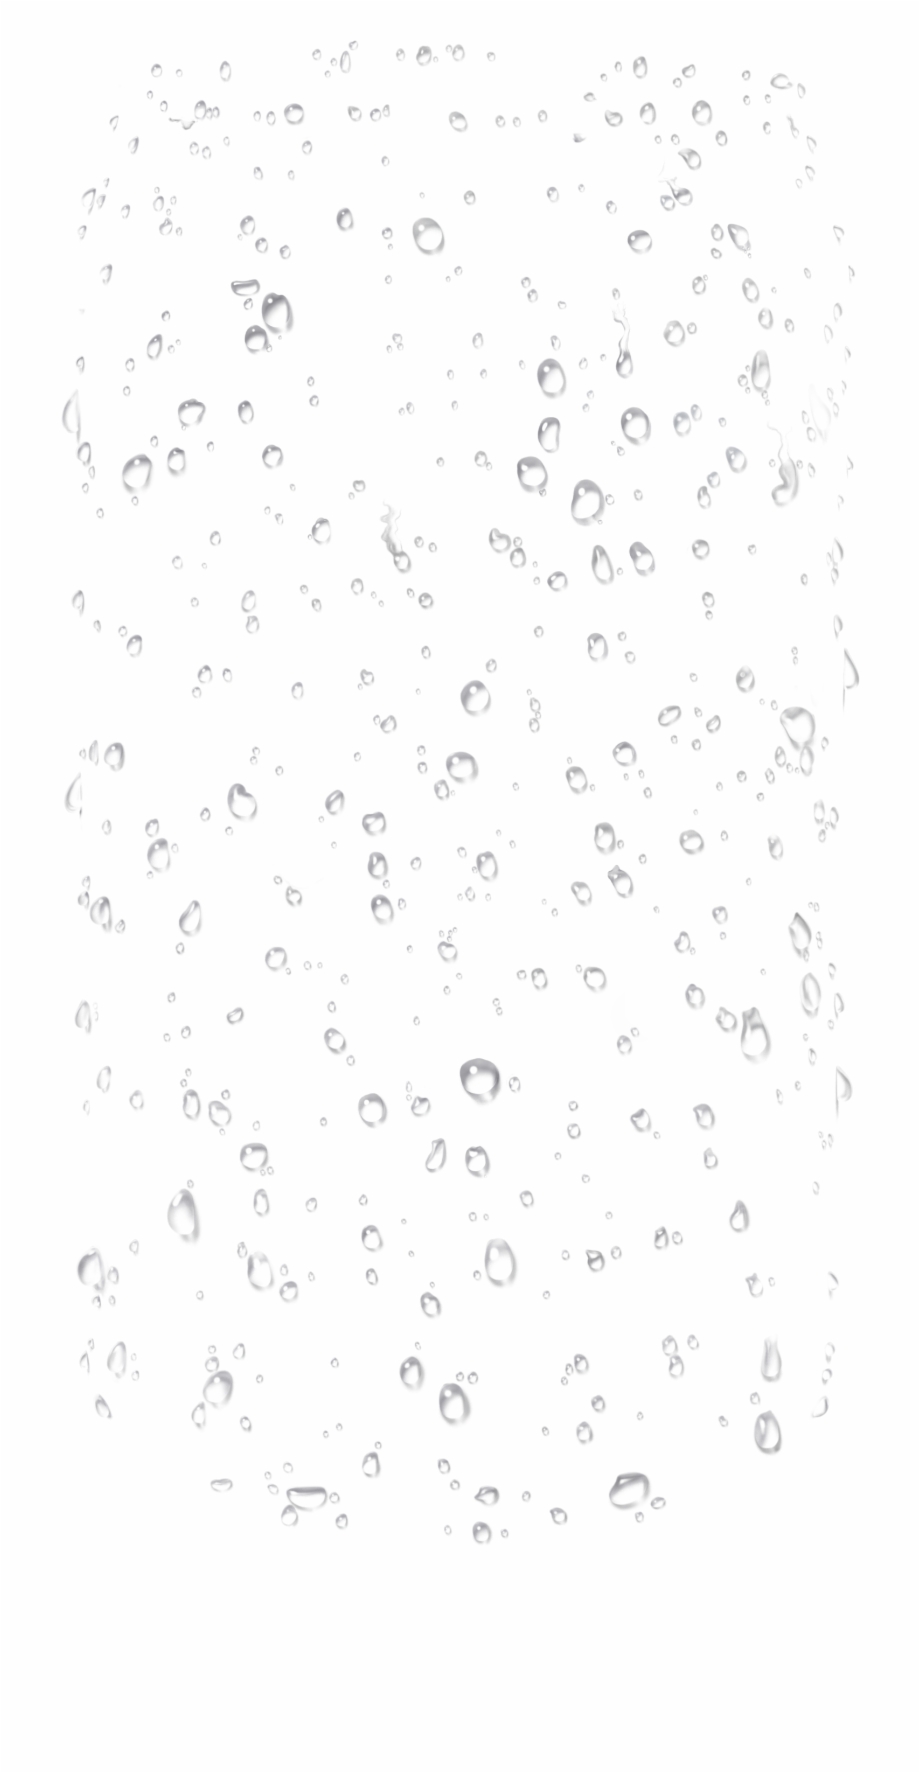 Drops Of Water Png Transparent Background Water Drop